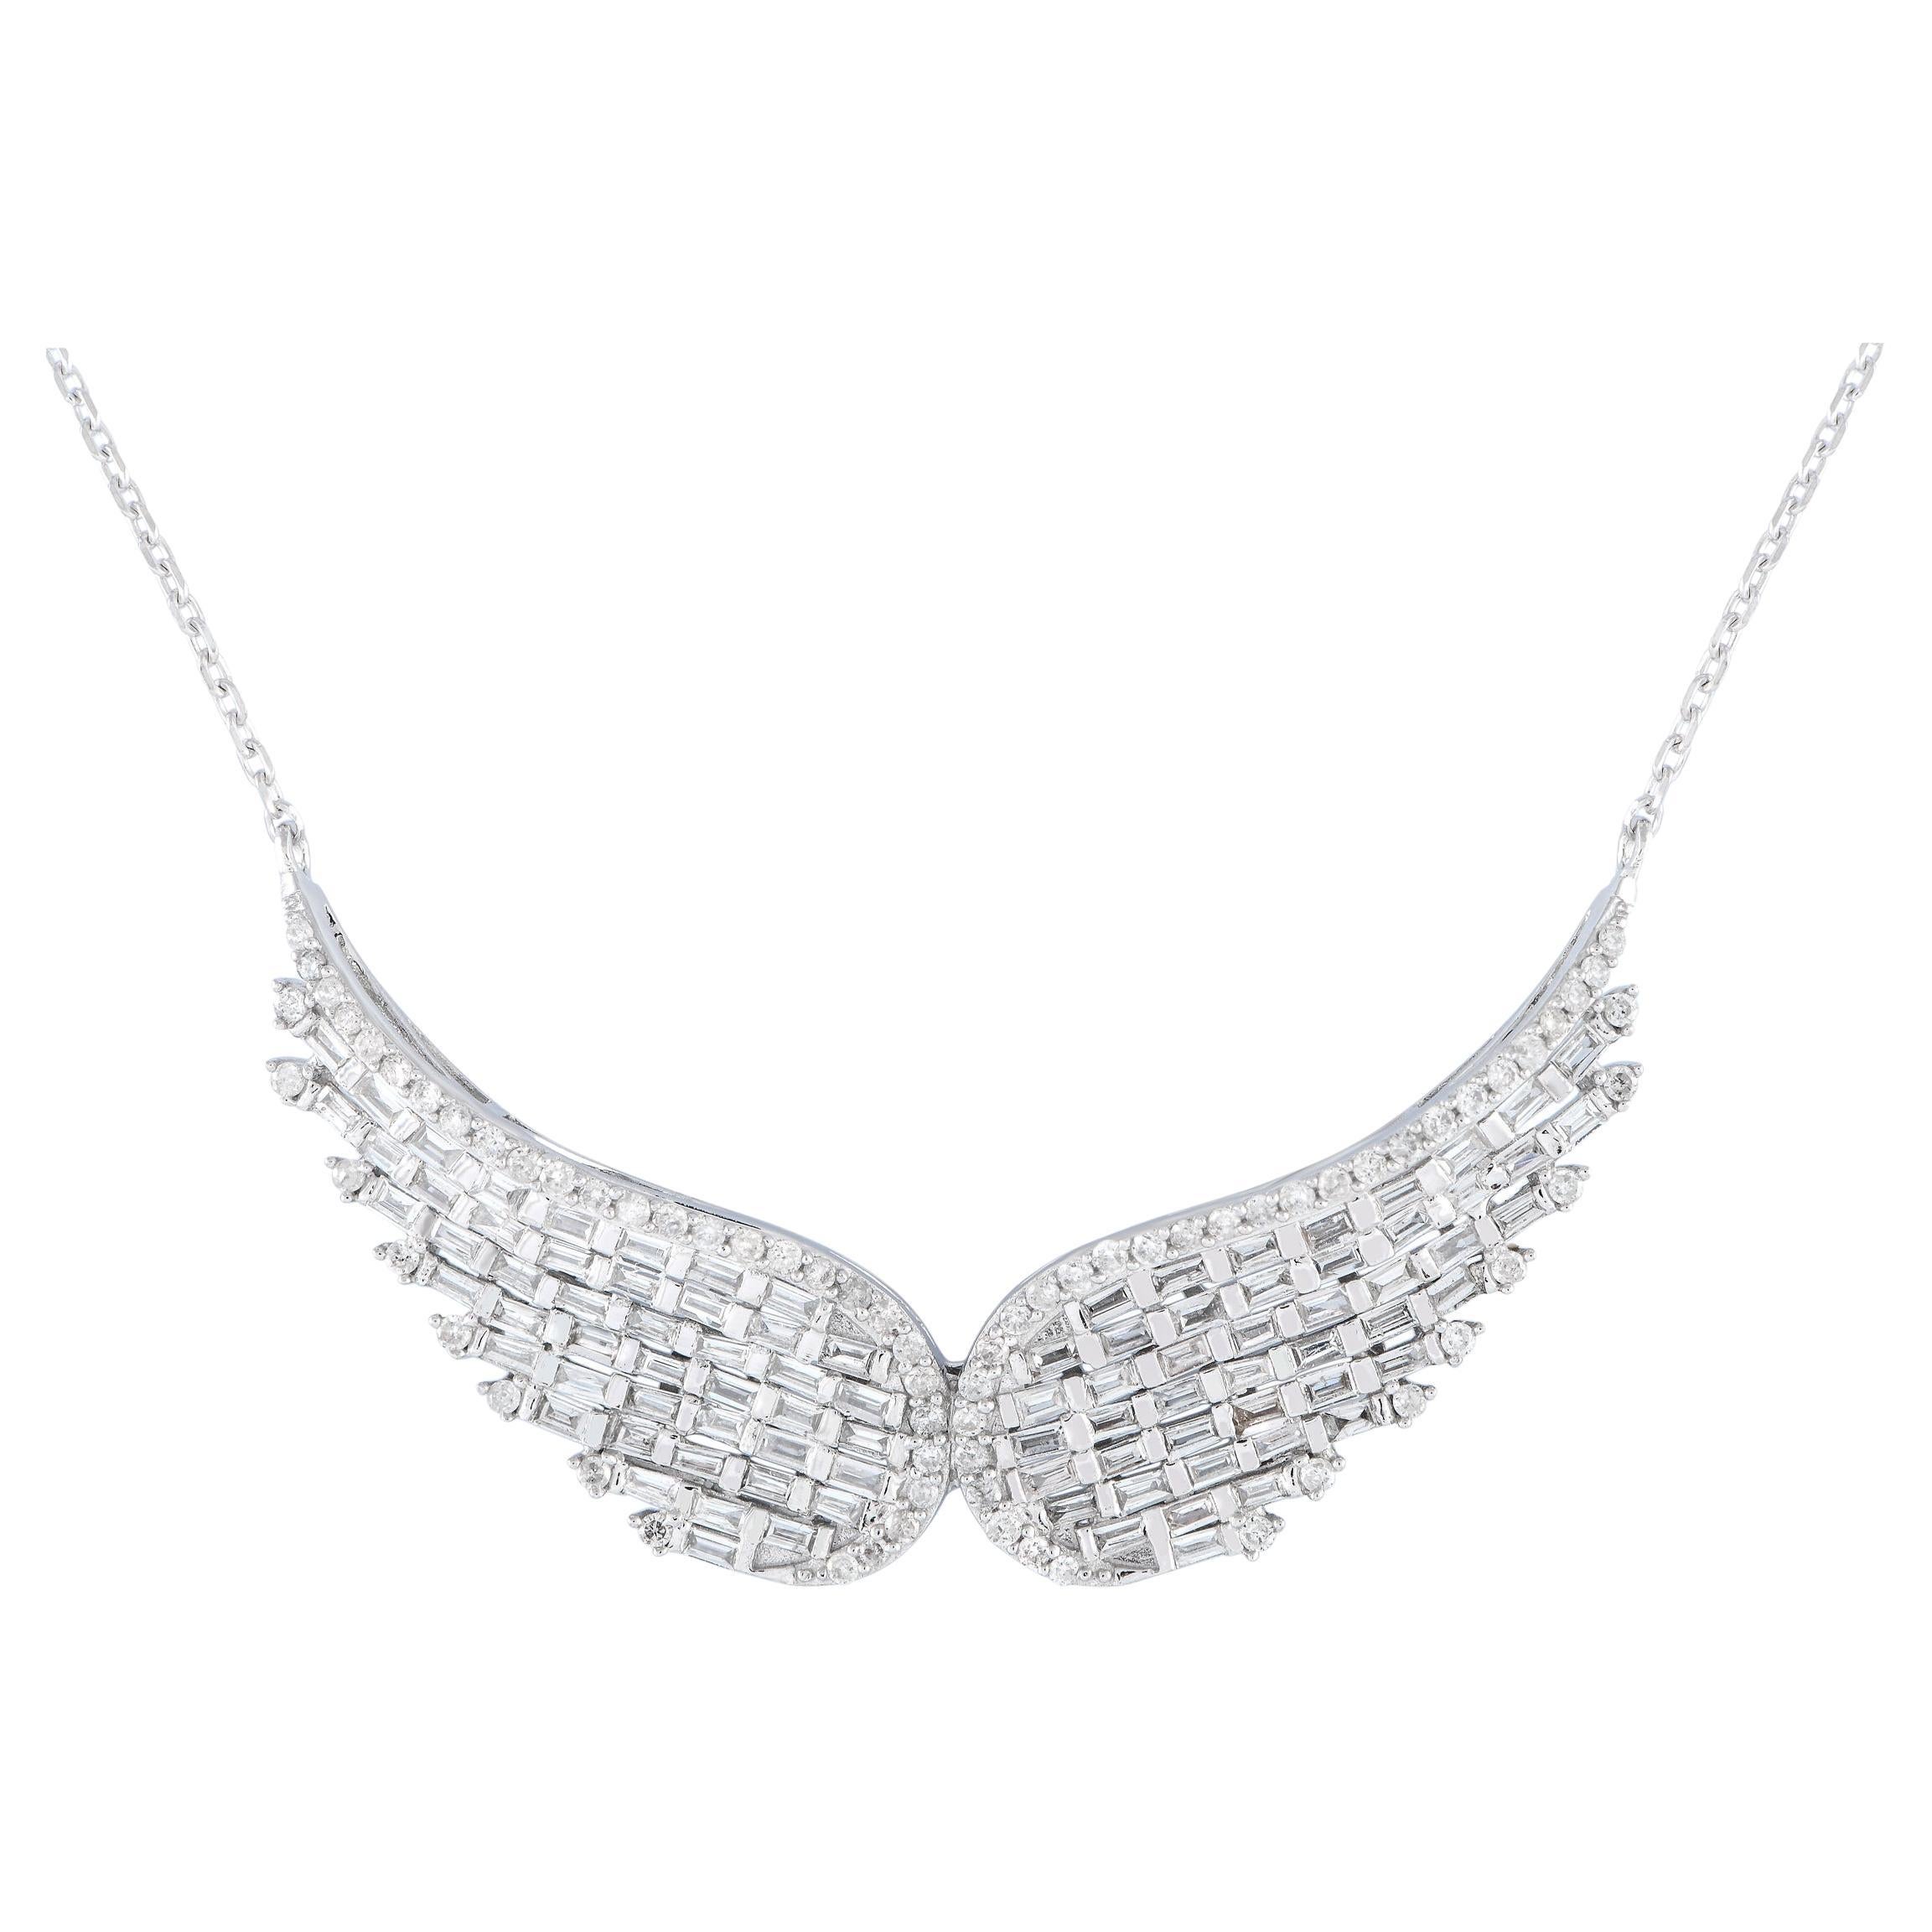 14K White Gold 1.06ct Diamond Wing Necklace